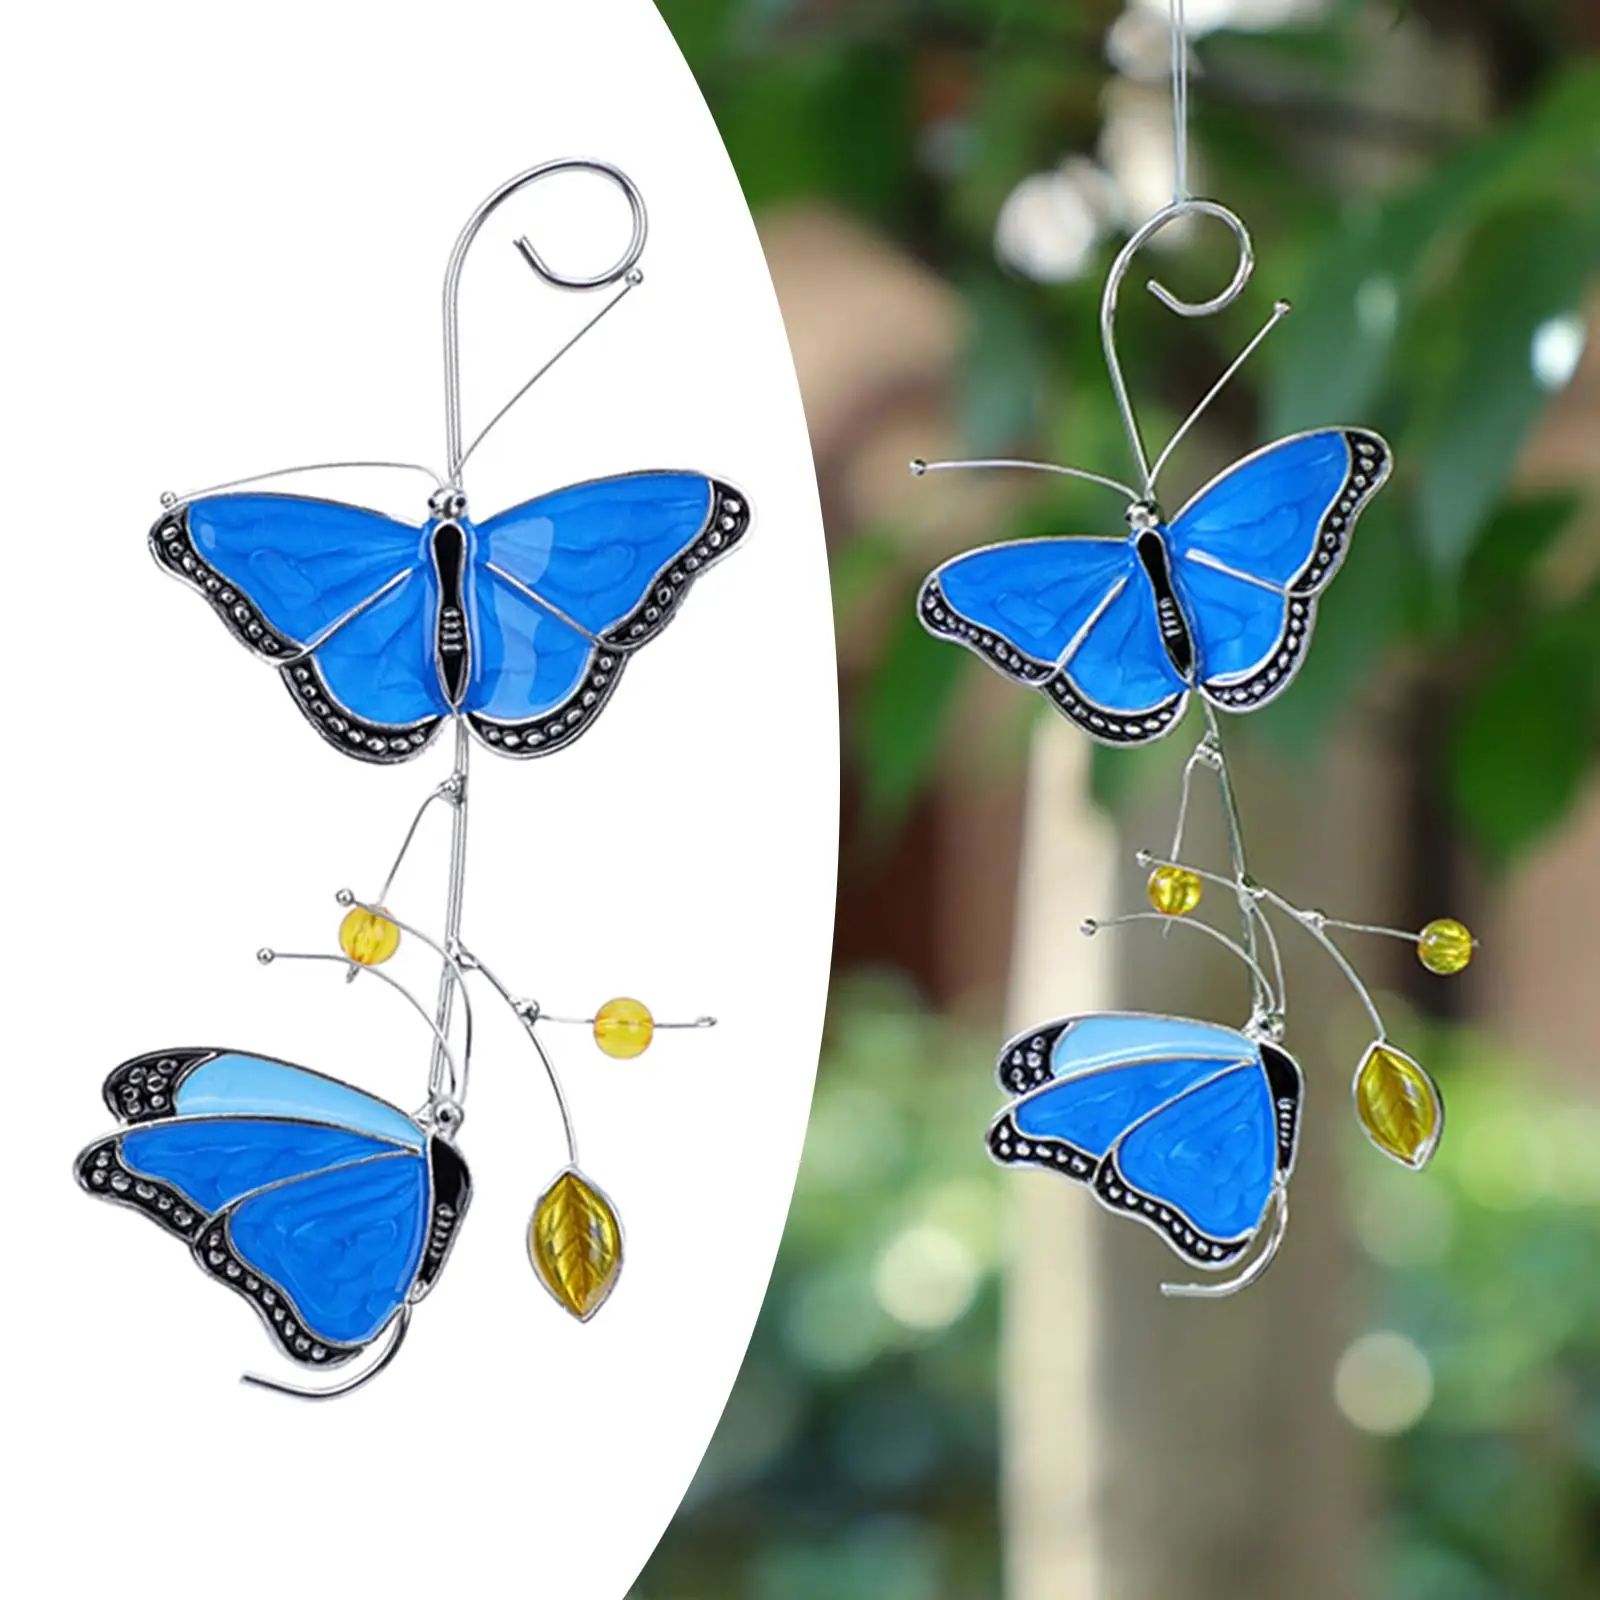 Stained Glass Blue Butterfly Windows Hangings Decoration